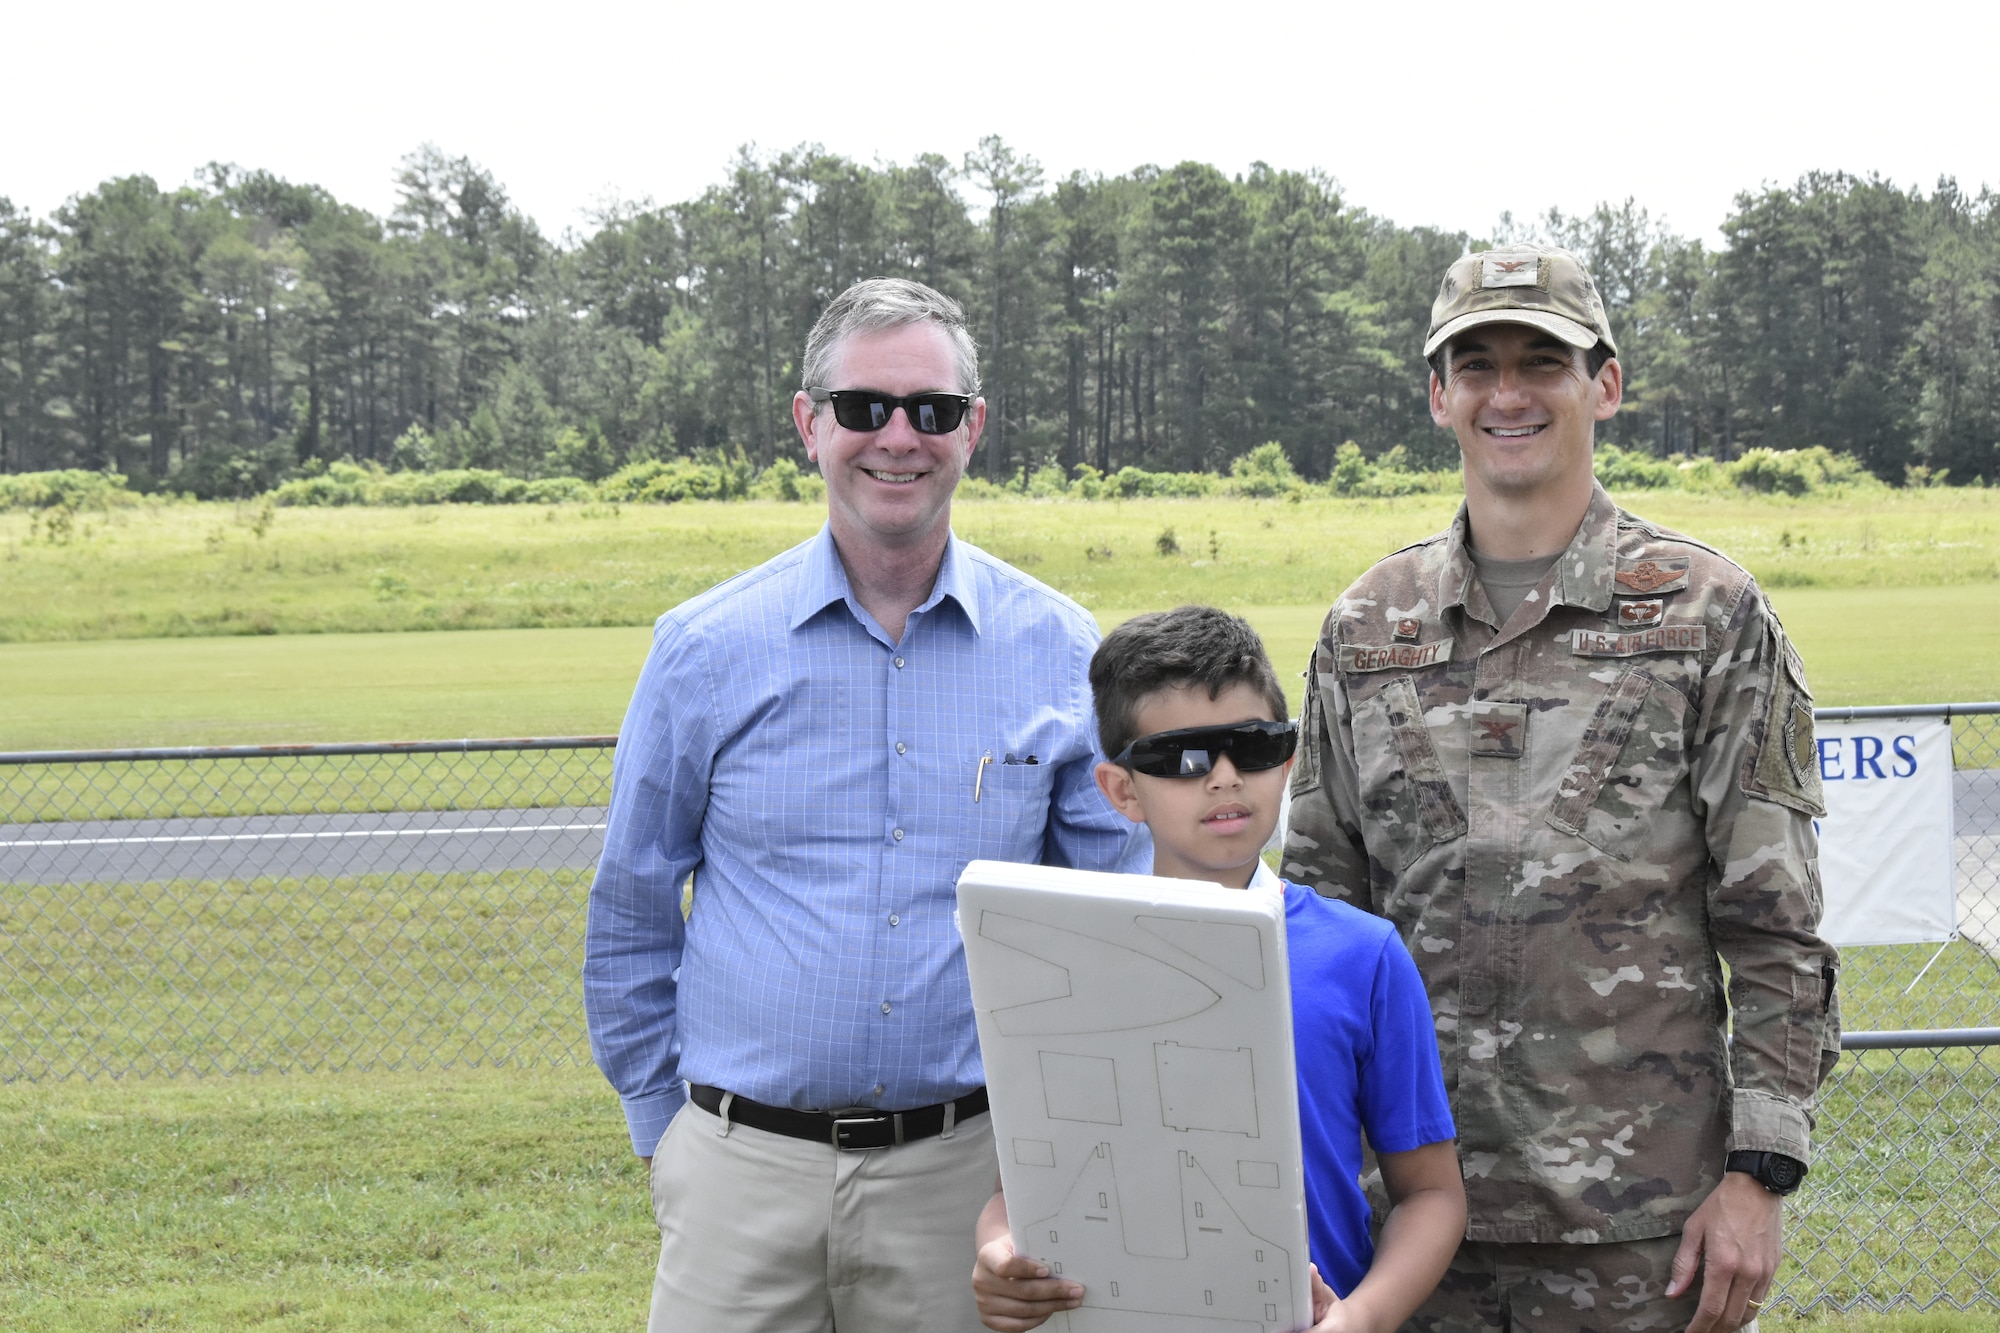 Miland Bonner, center, was a second-place winner in the Coffee Airfoilers Model RC Club June 26, 2021, airplane toss competition hosted by the club to coincide with the Arnold Engineering Development Complex 70th anniversary. Also pictured are AEDC Commander Col. Jeffrey Geraghty, right, and AEDC Vice Director Jason Coker. Youth participating in the event were tasked with assembling small balsa wood airplanes, with prizes going to those whose planes flew the furthest from the launch line. The event was intended to promote science, technology, engineering and mathematics, or STEM, interest among students taking part. (U.S. Air Force photo by Bradley Hicks)